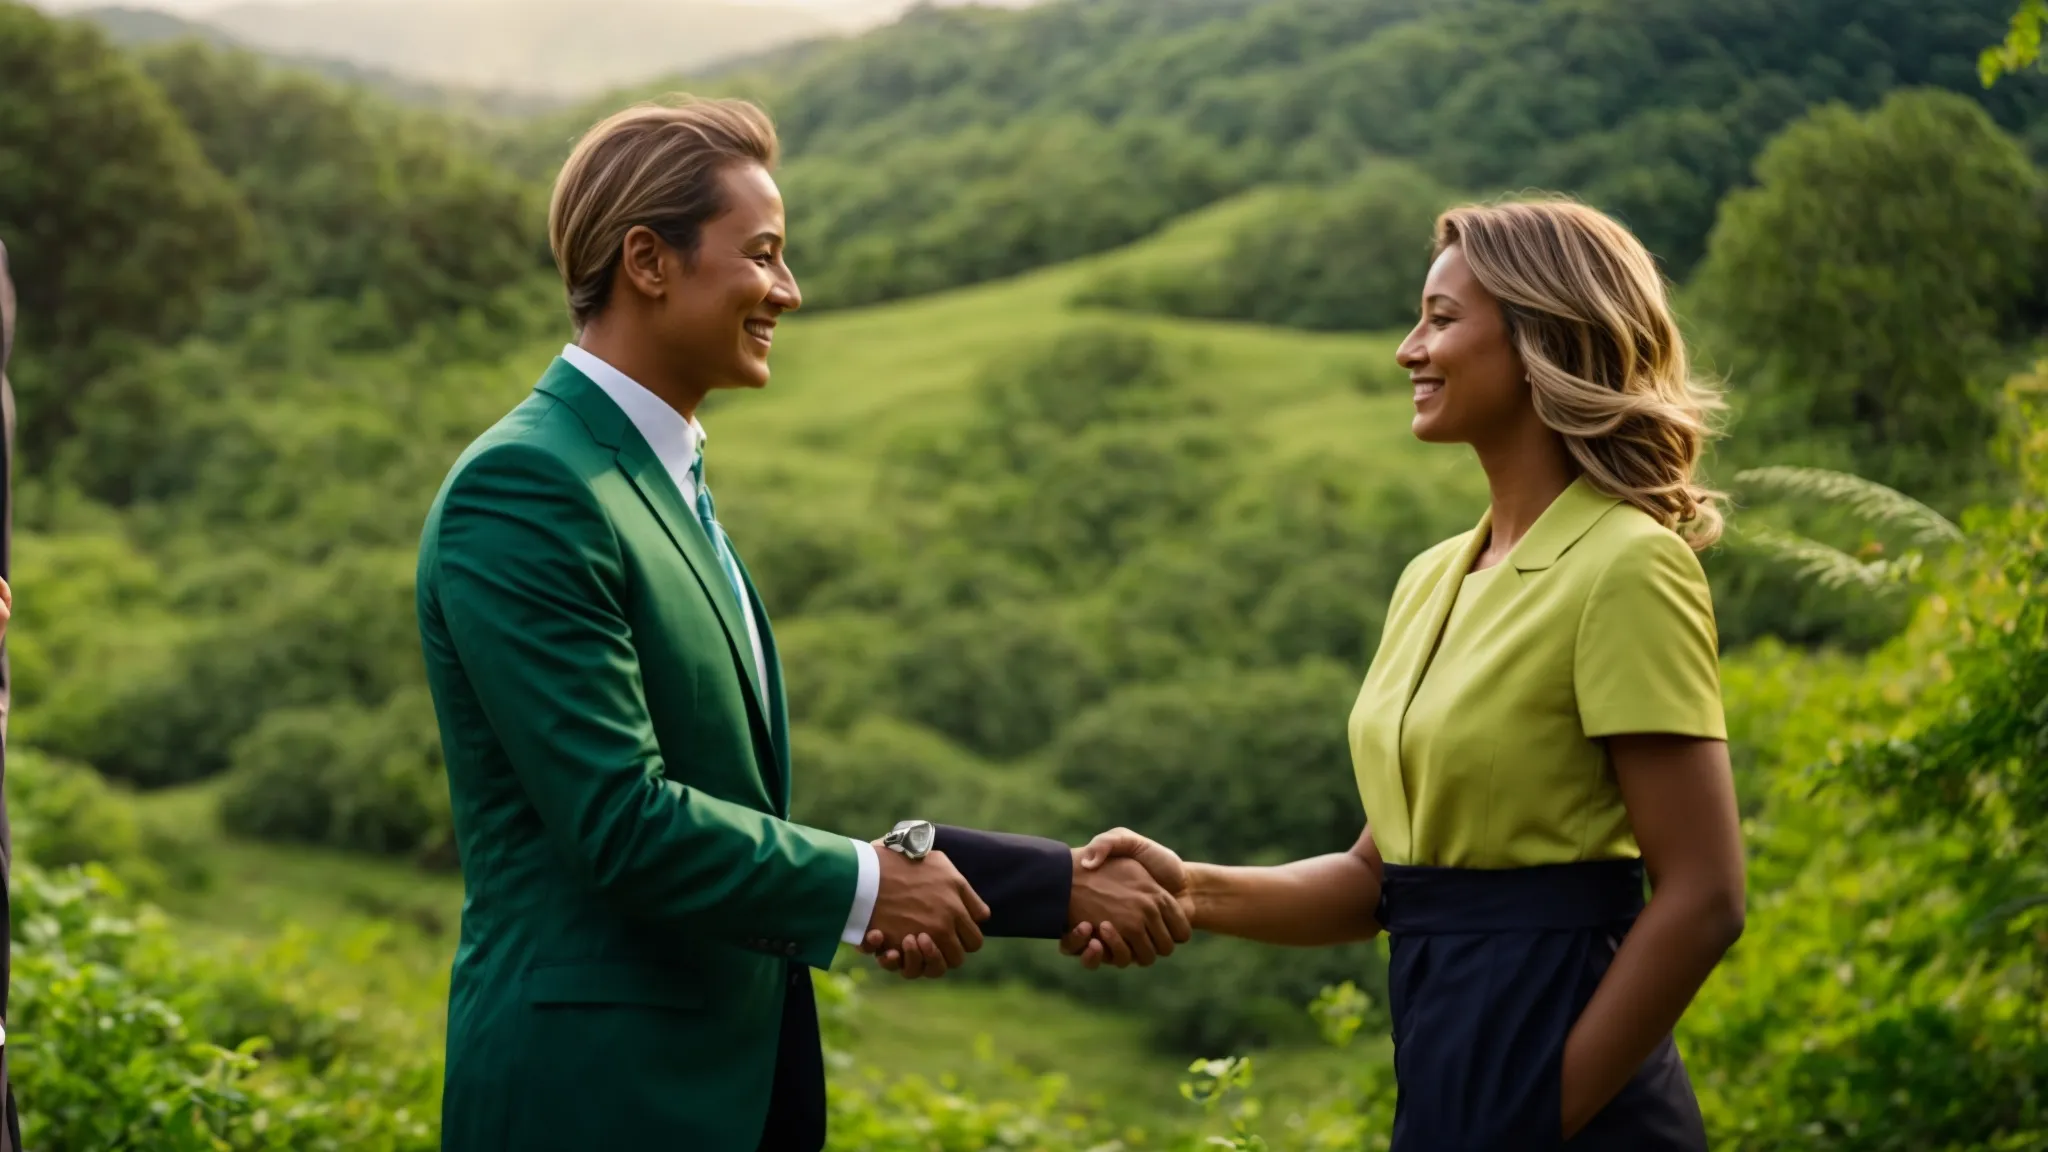 two business leaders shaking hands in front of a vibrant, flourishing green landscape, symbolizing a partnership for sustainability.